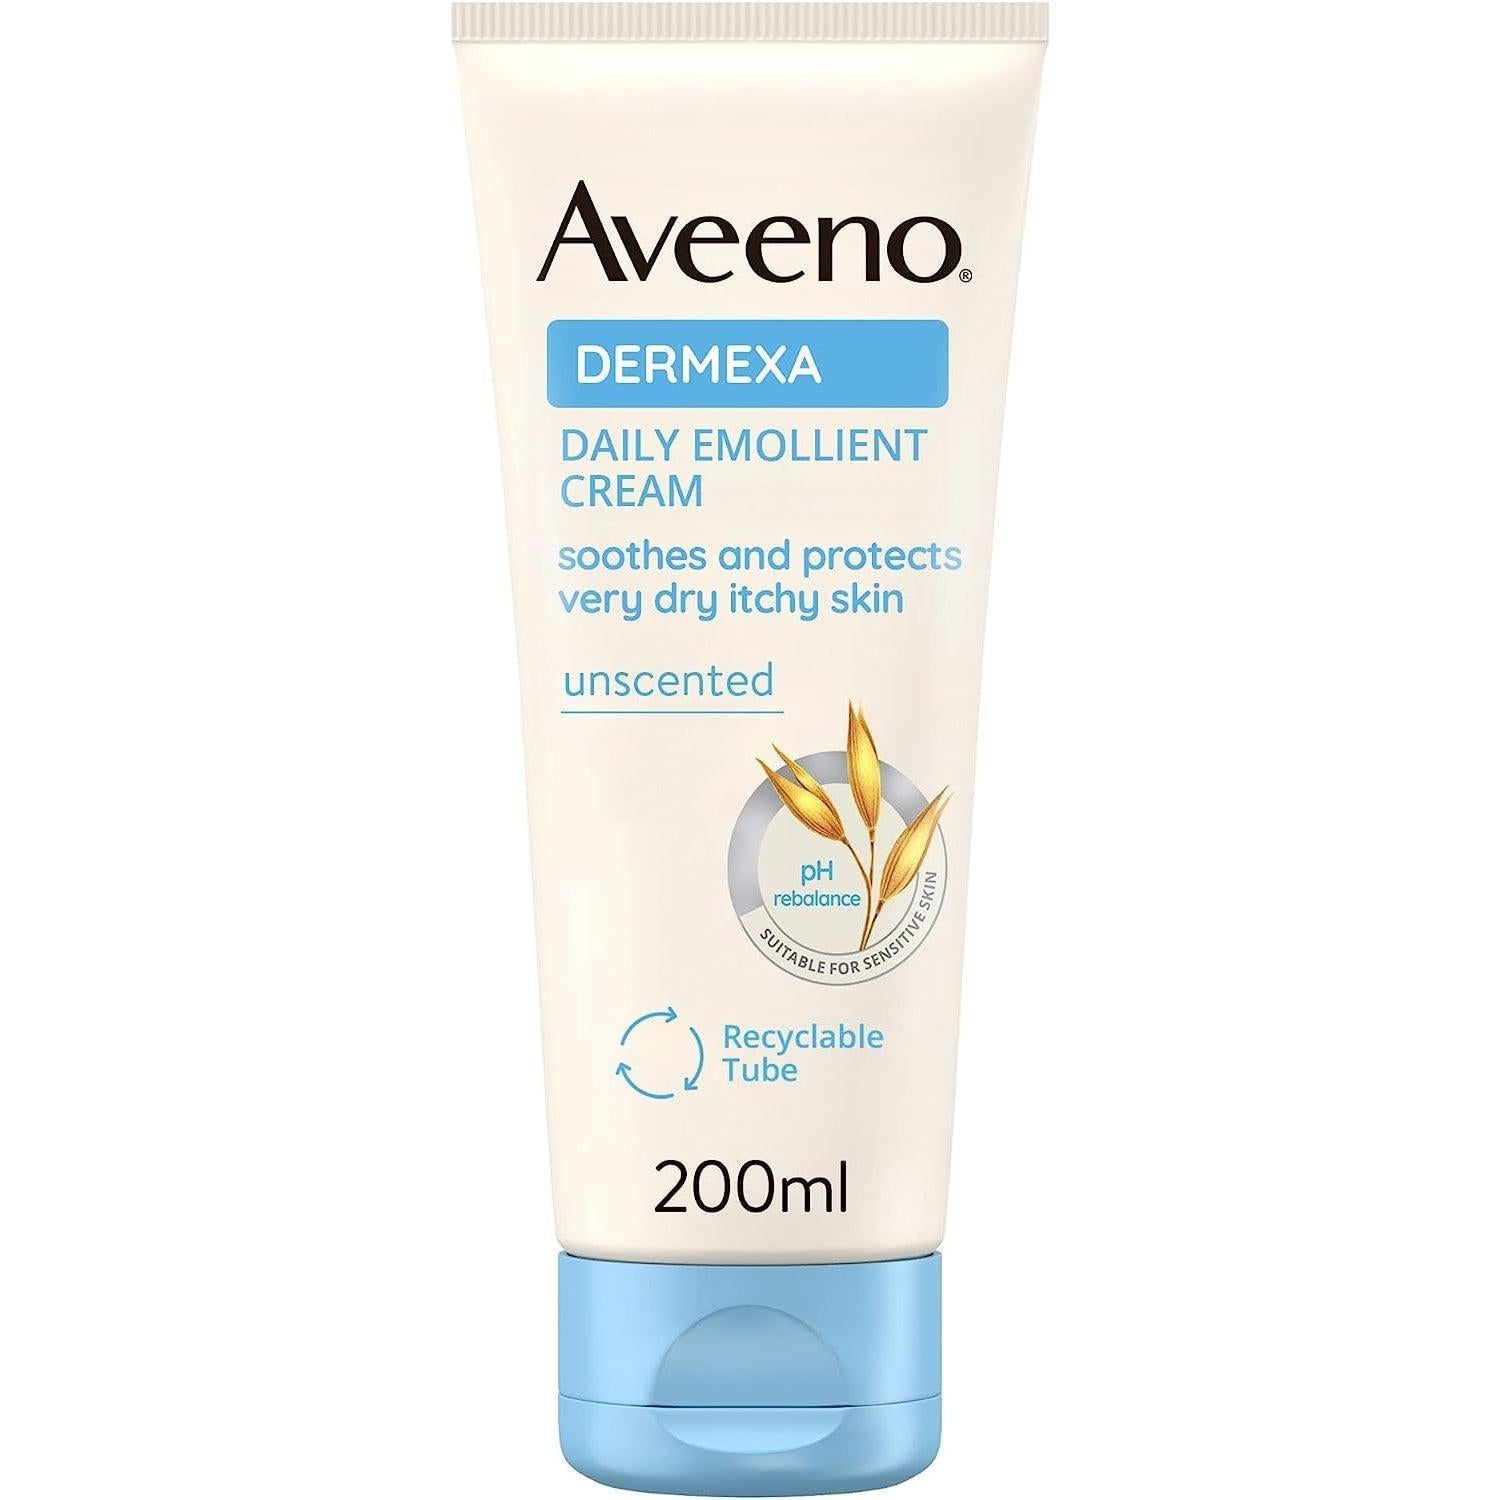 Aveeno Dermexa Daily Emollient Cream for very dry itchy skin 200 ml - Healthxpress.ie